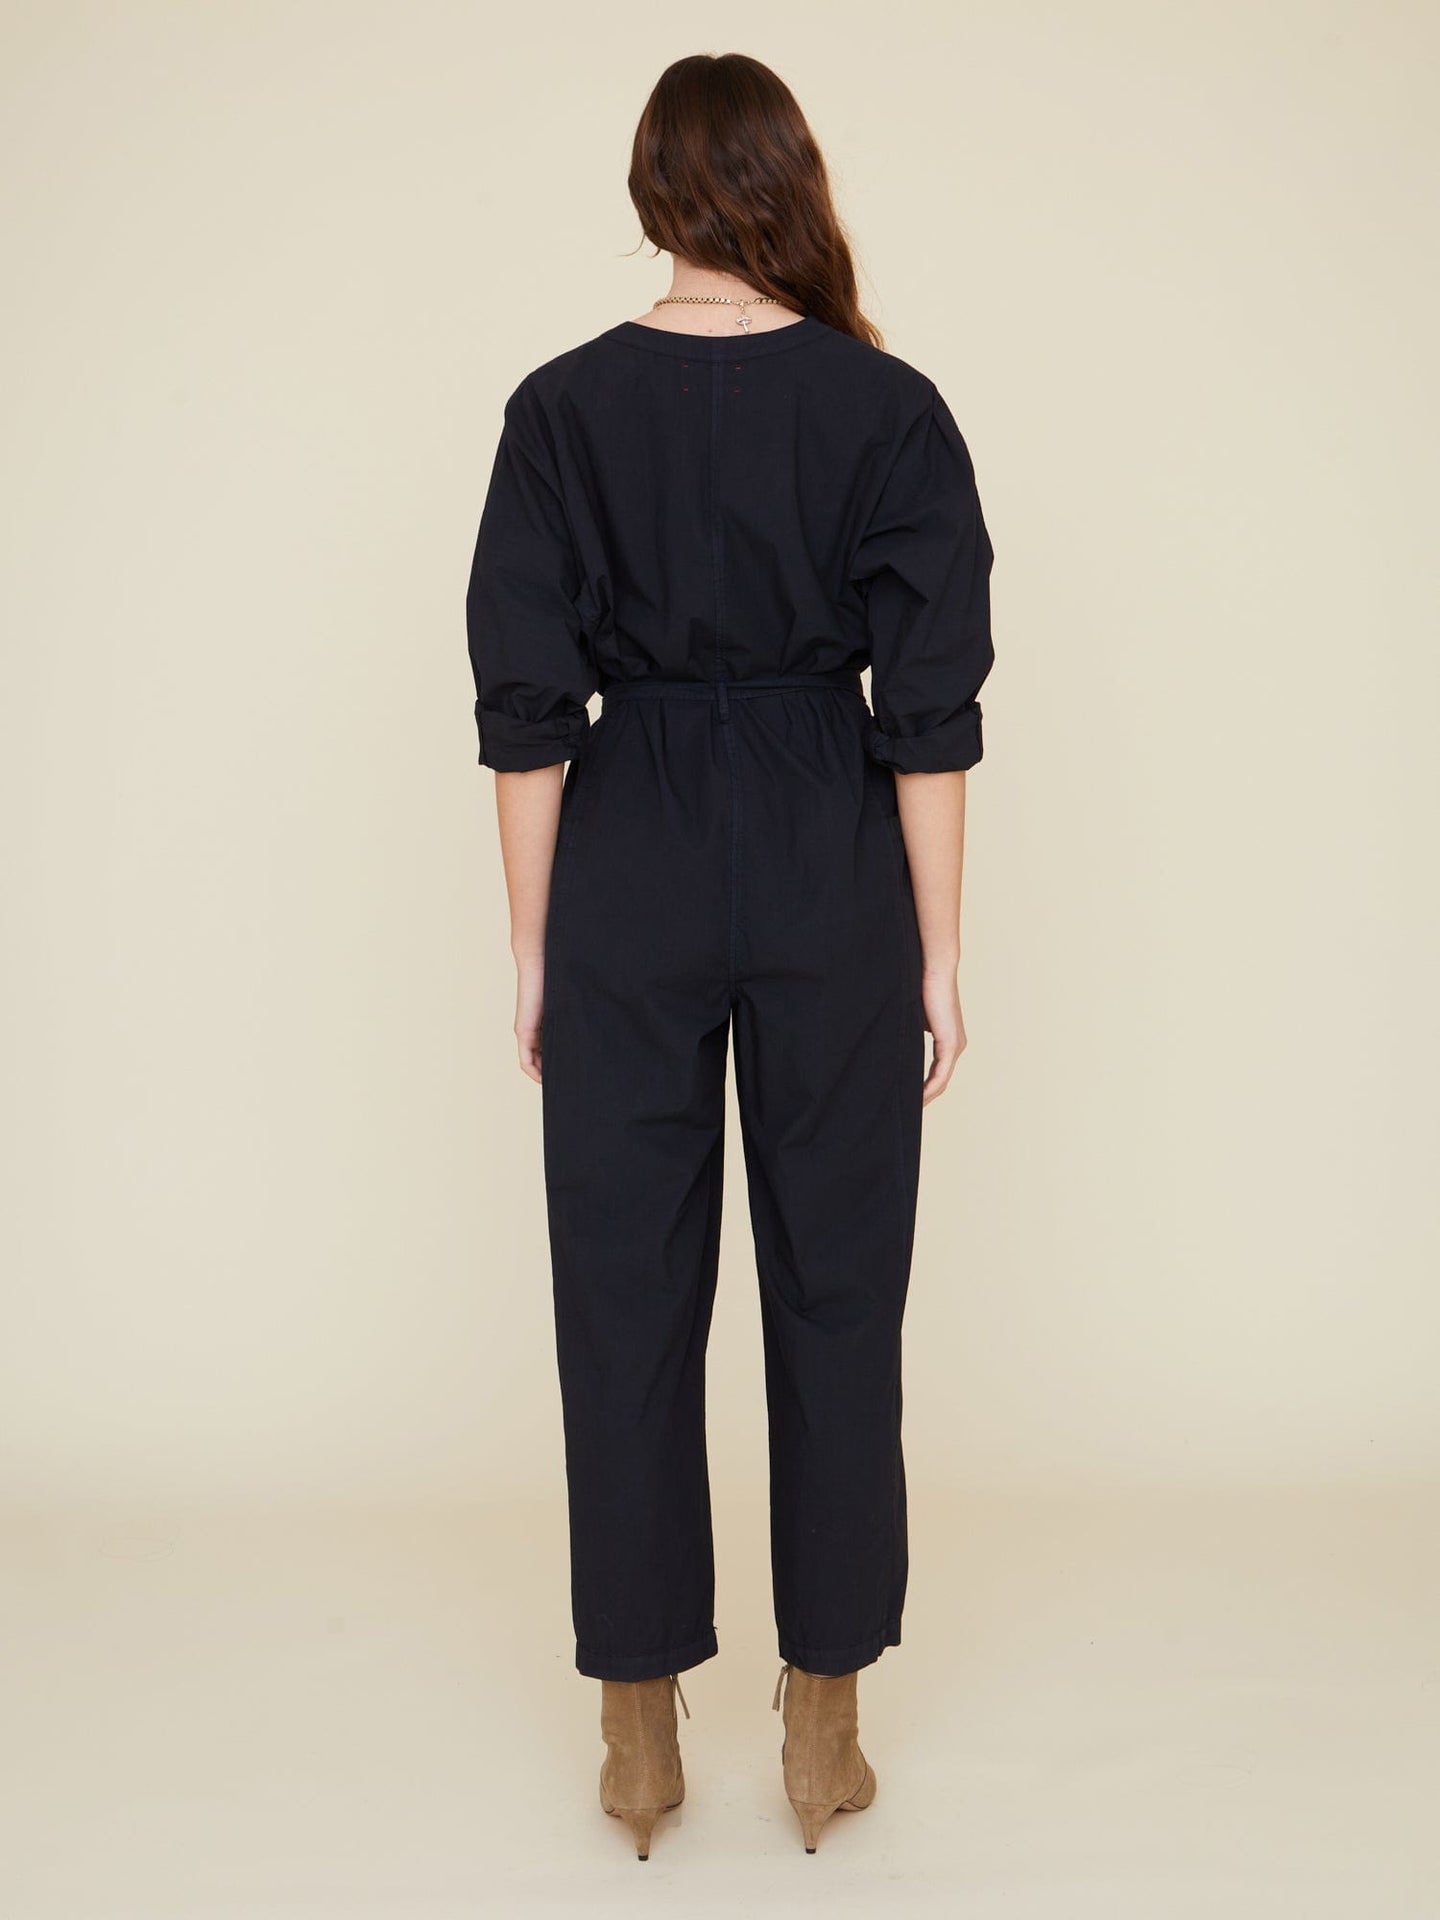 Xirena Kenton Jumpsuit in Black available at TNT The New Trend Australia